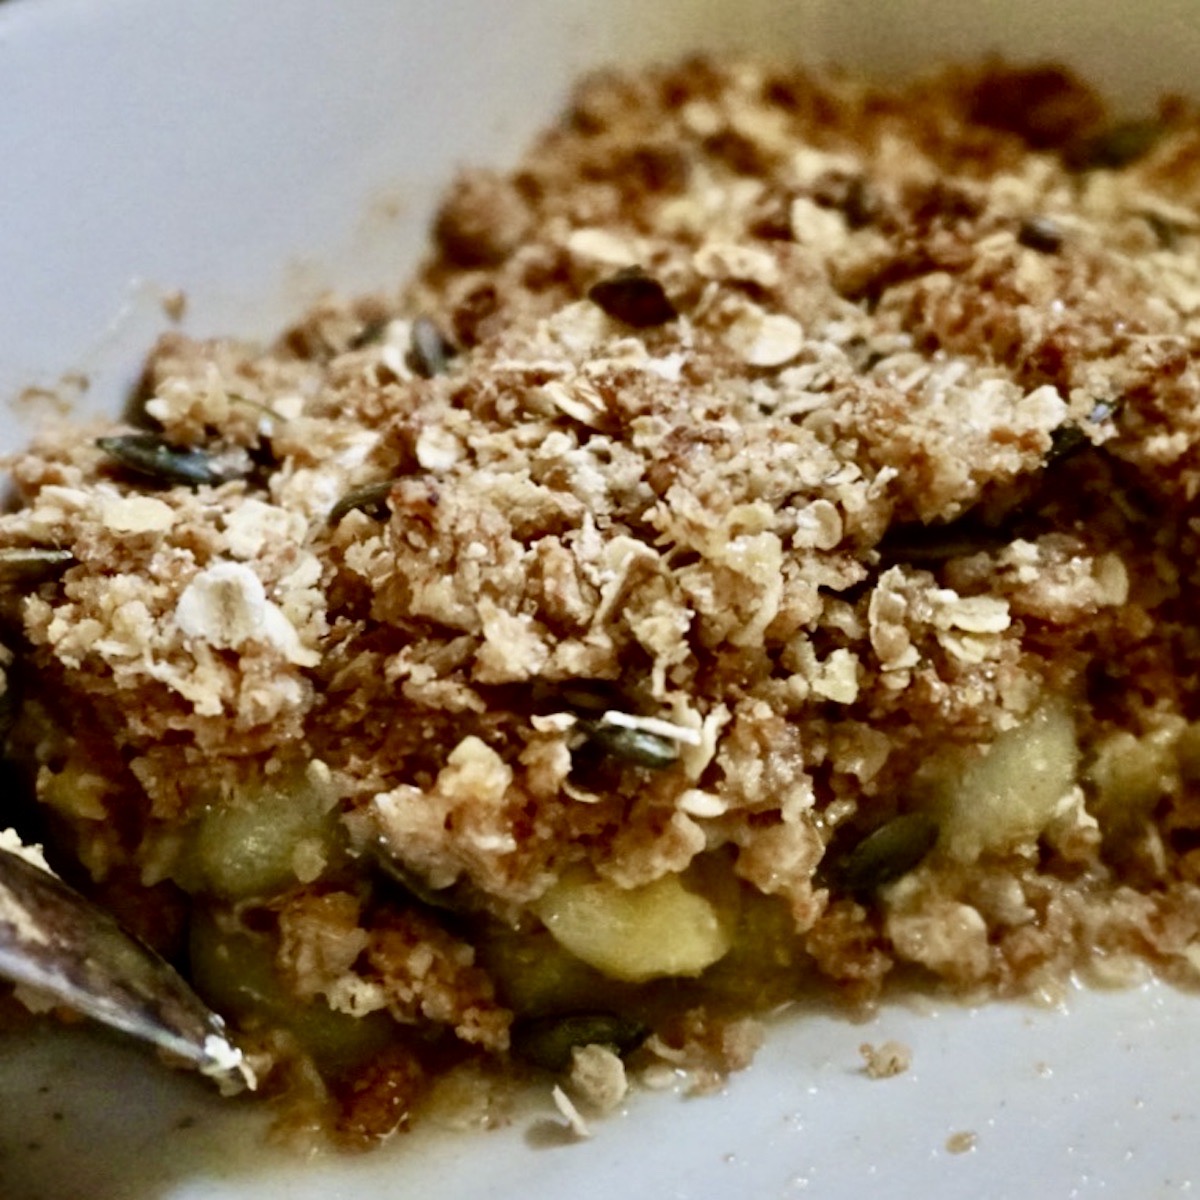 Wholemeal fruit crumble